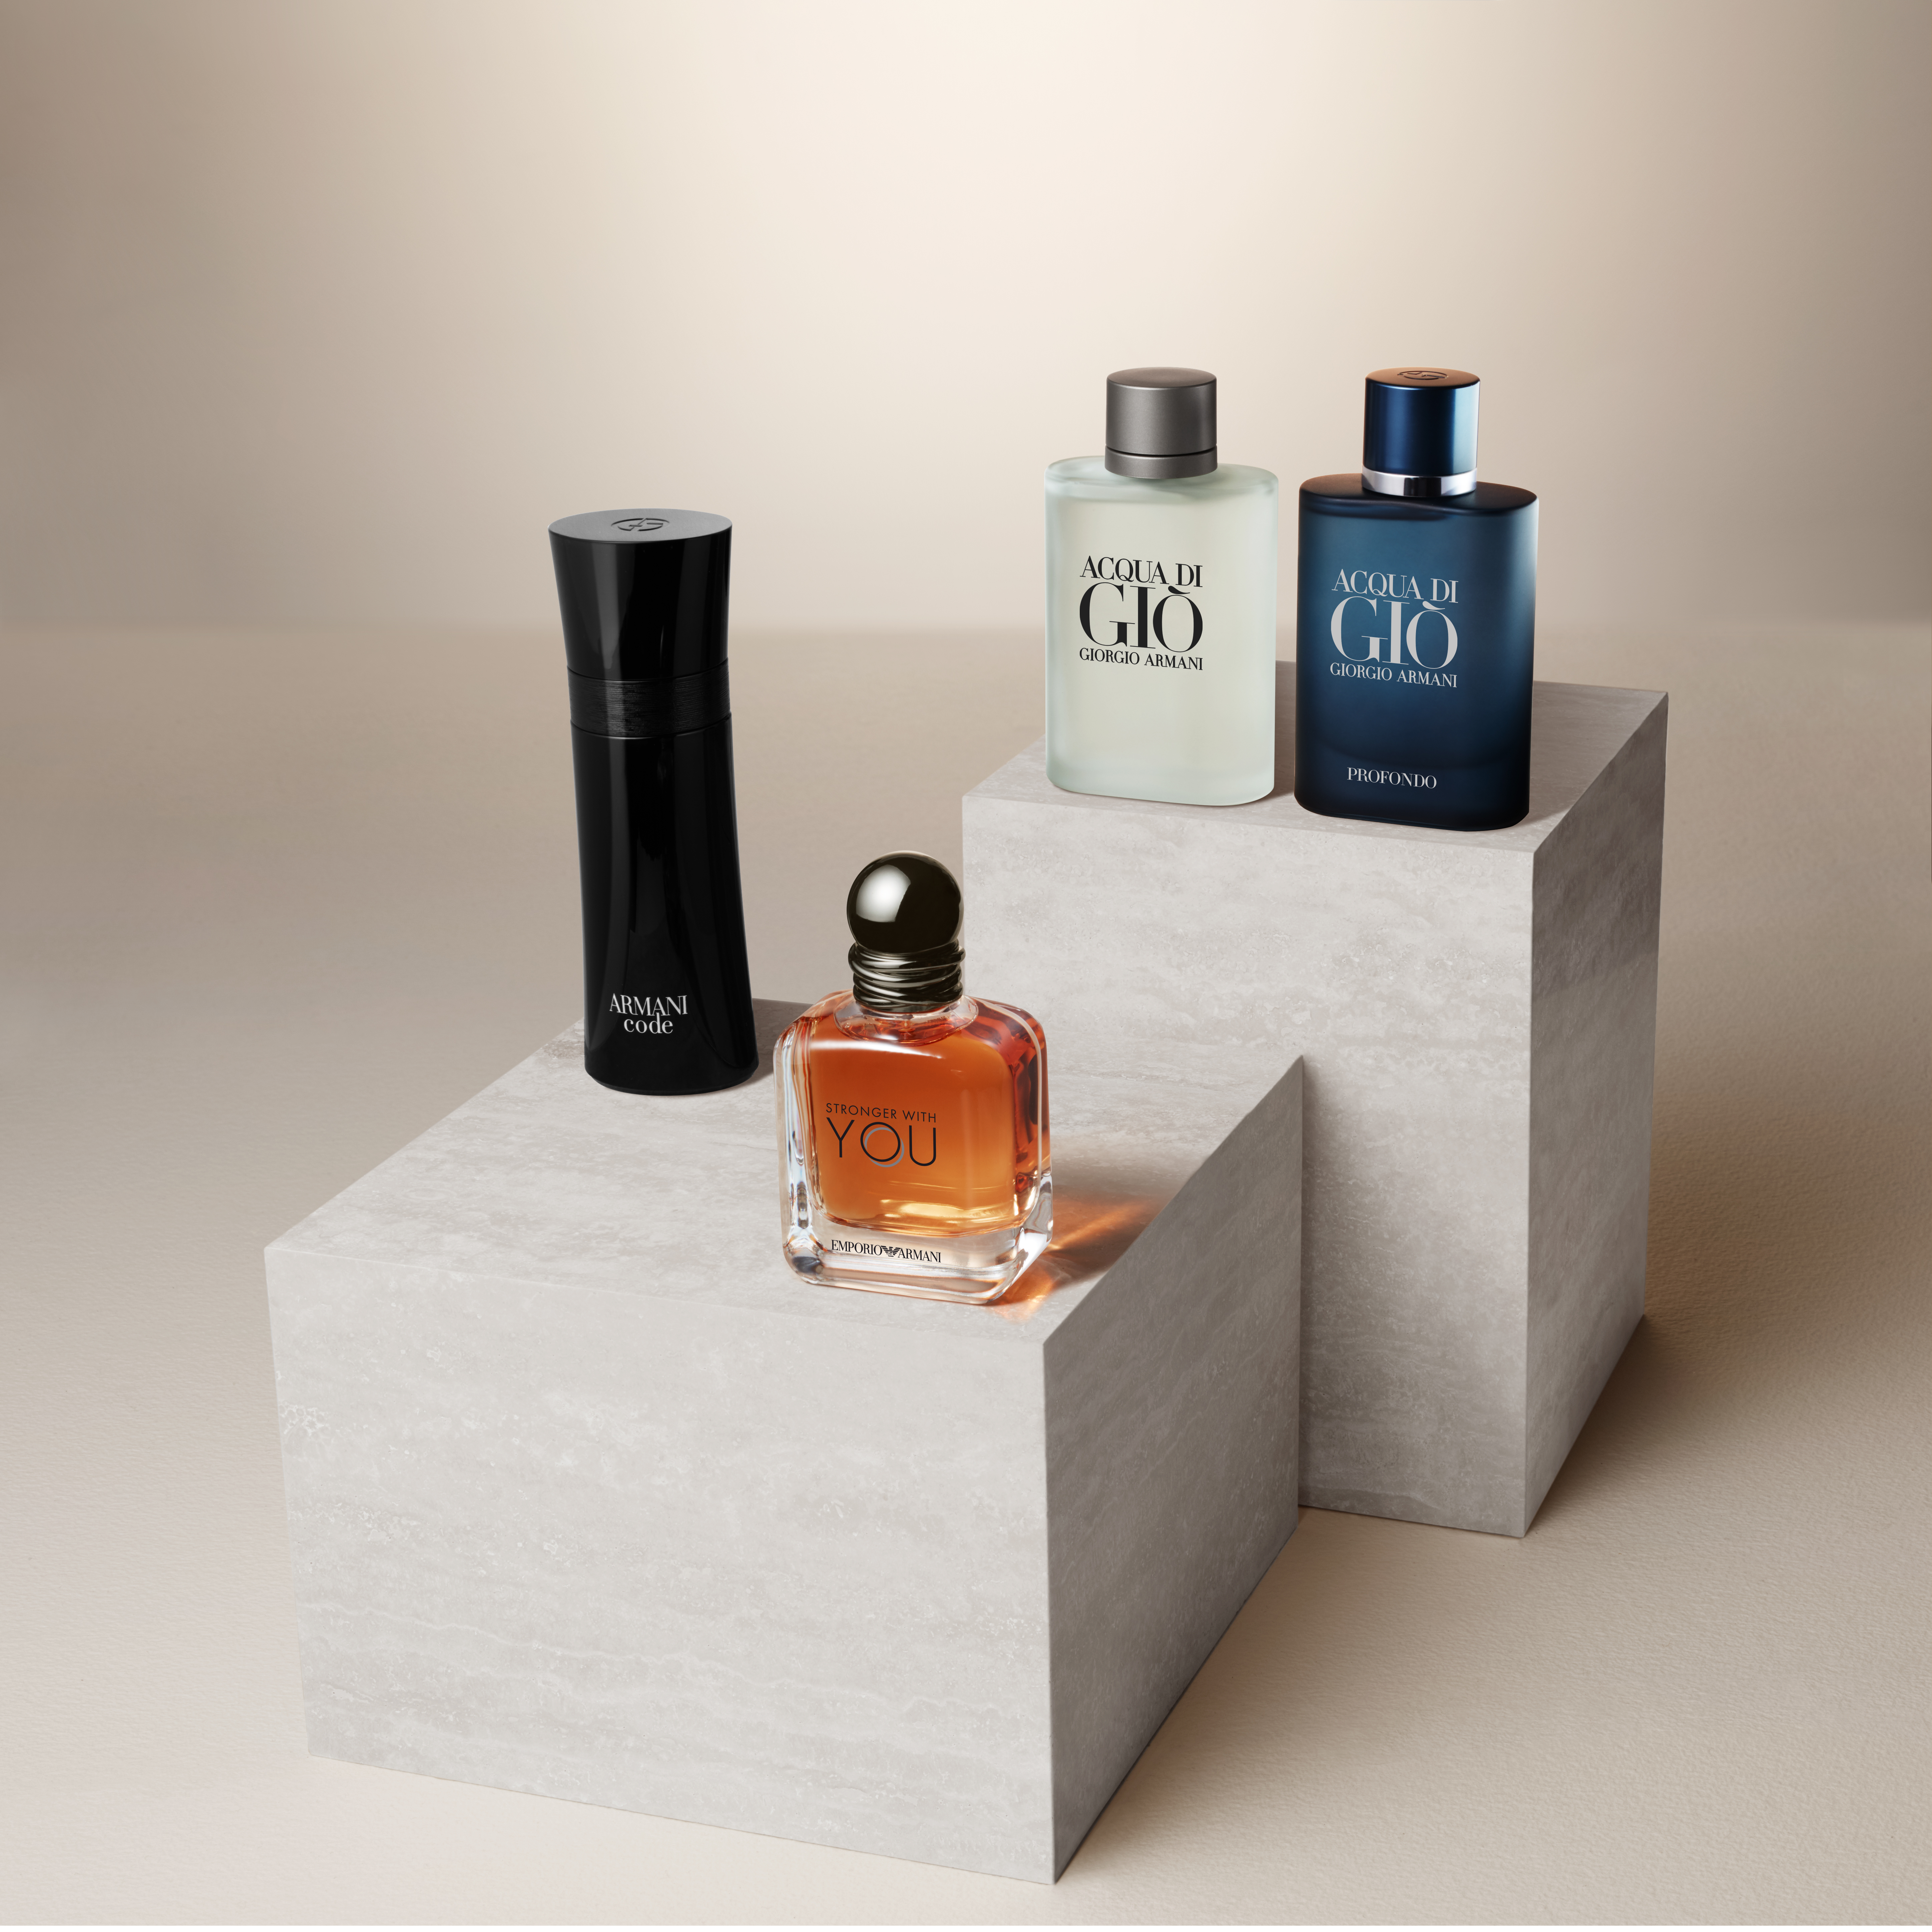 Partition - 07_armani_crm_nm_welcome_email_fragrance_masc.jpg